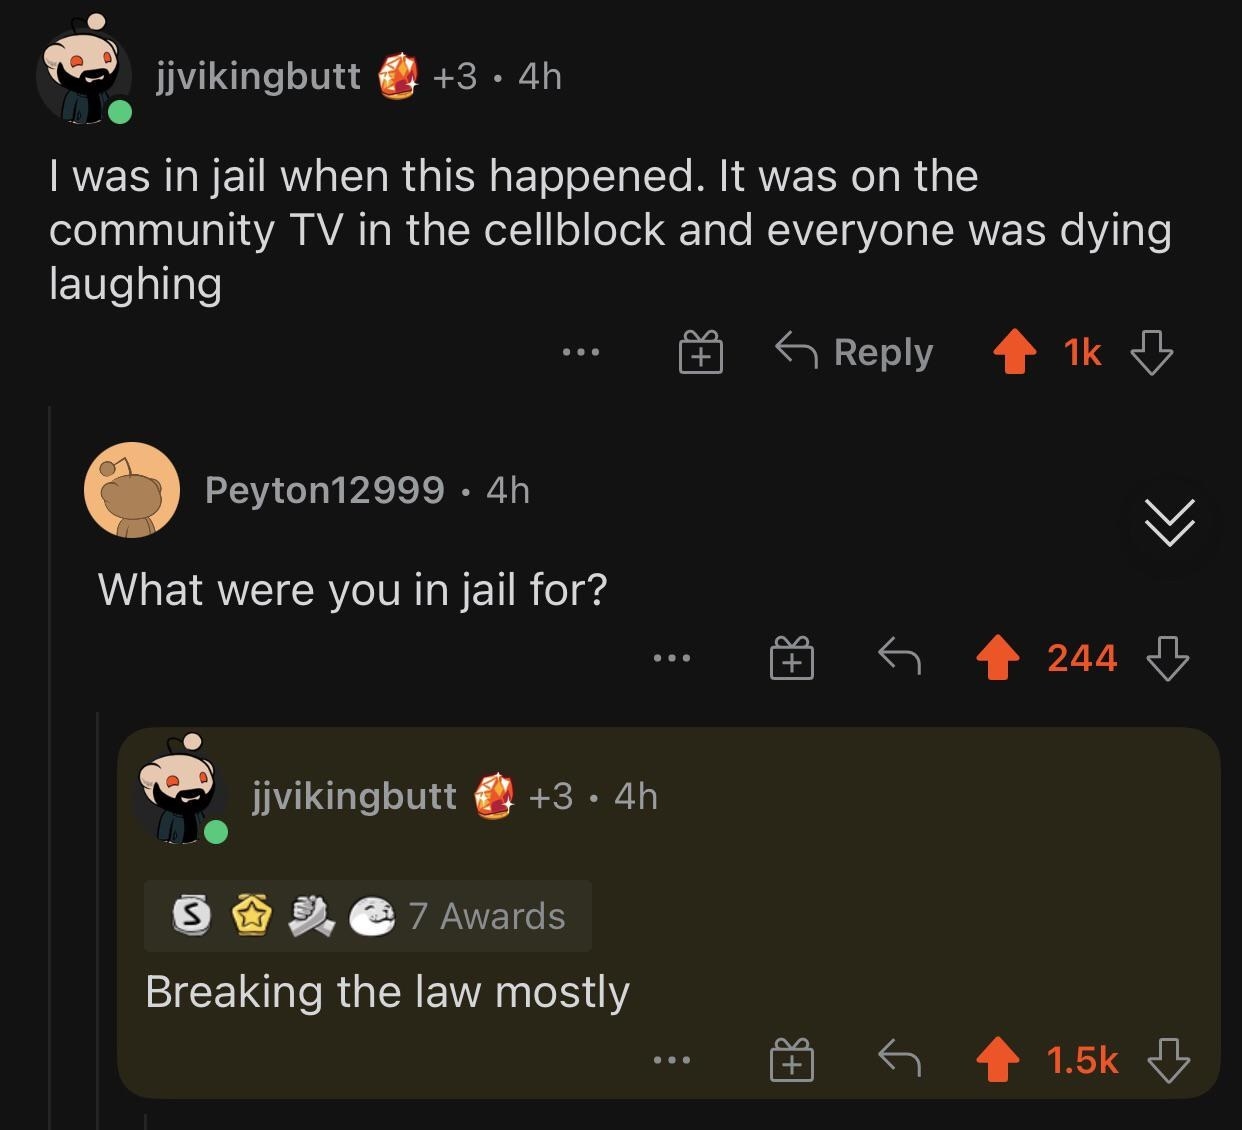 Someone asks why a person was in jail and they respond, breaking the law mostly